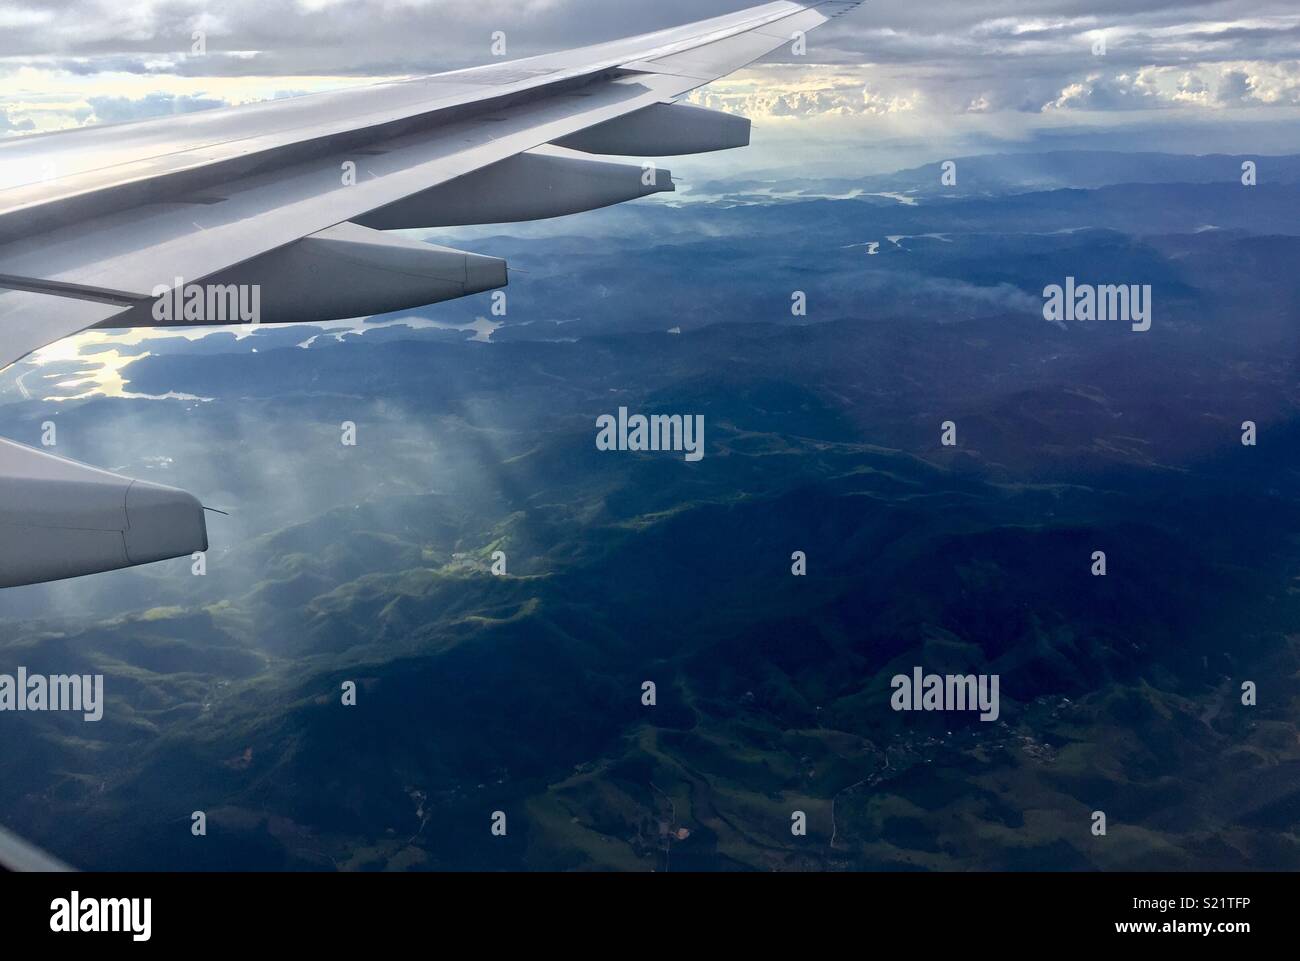 Stunning shot from up above. Stock Photo